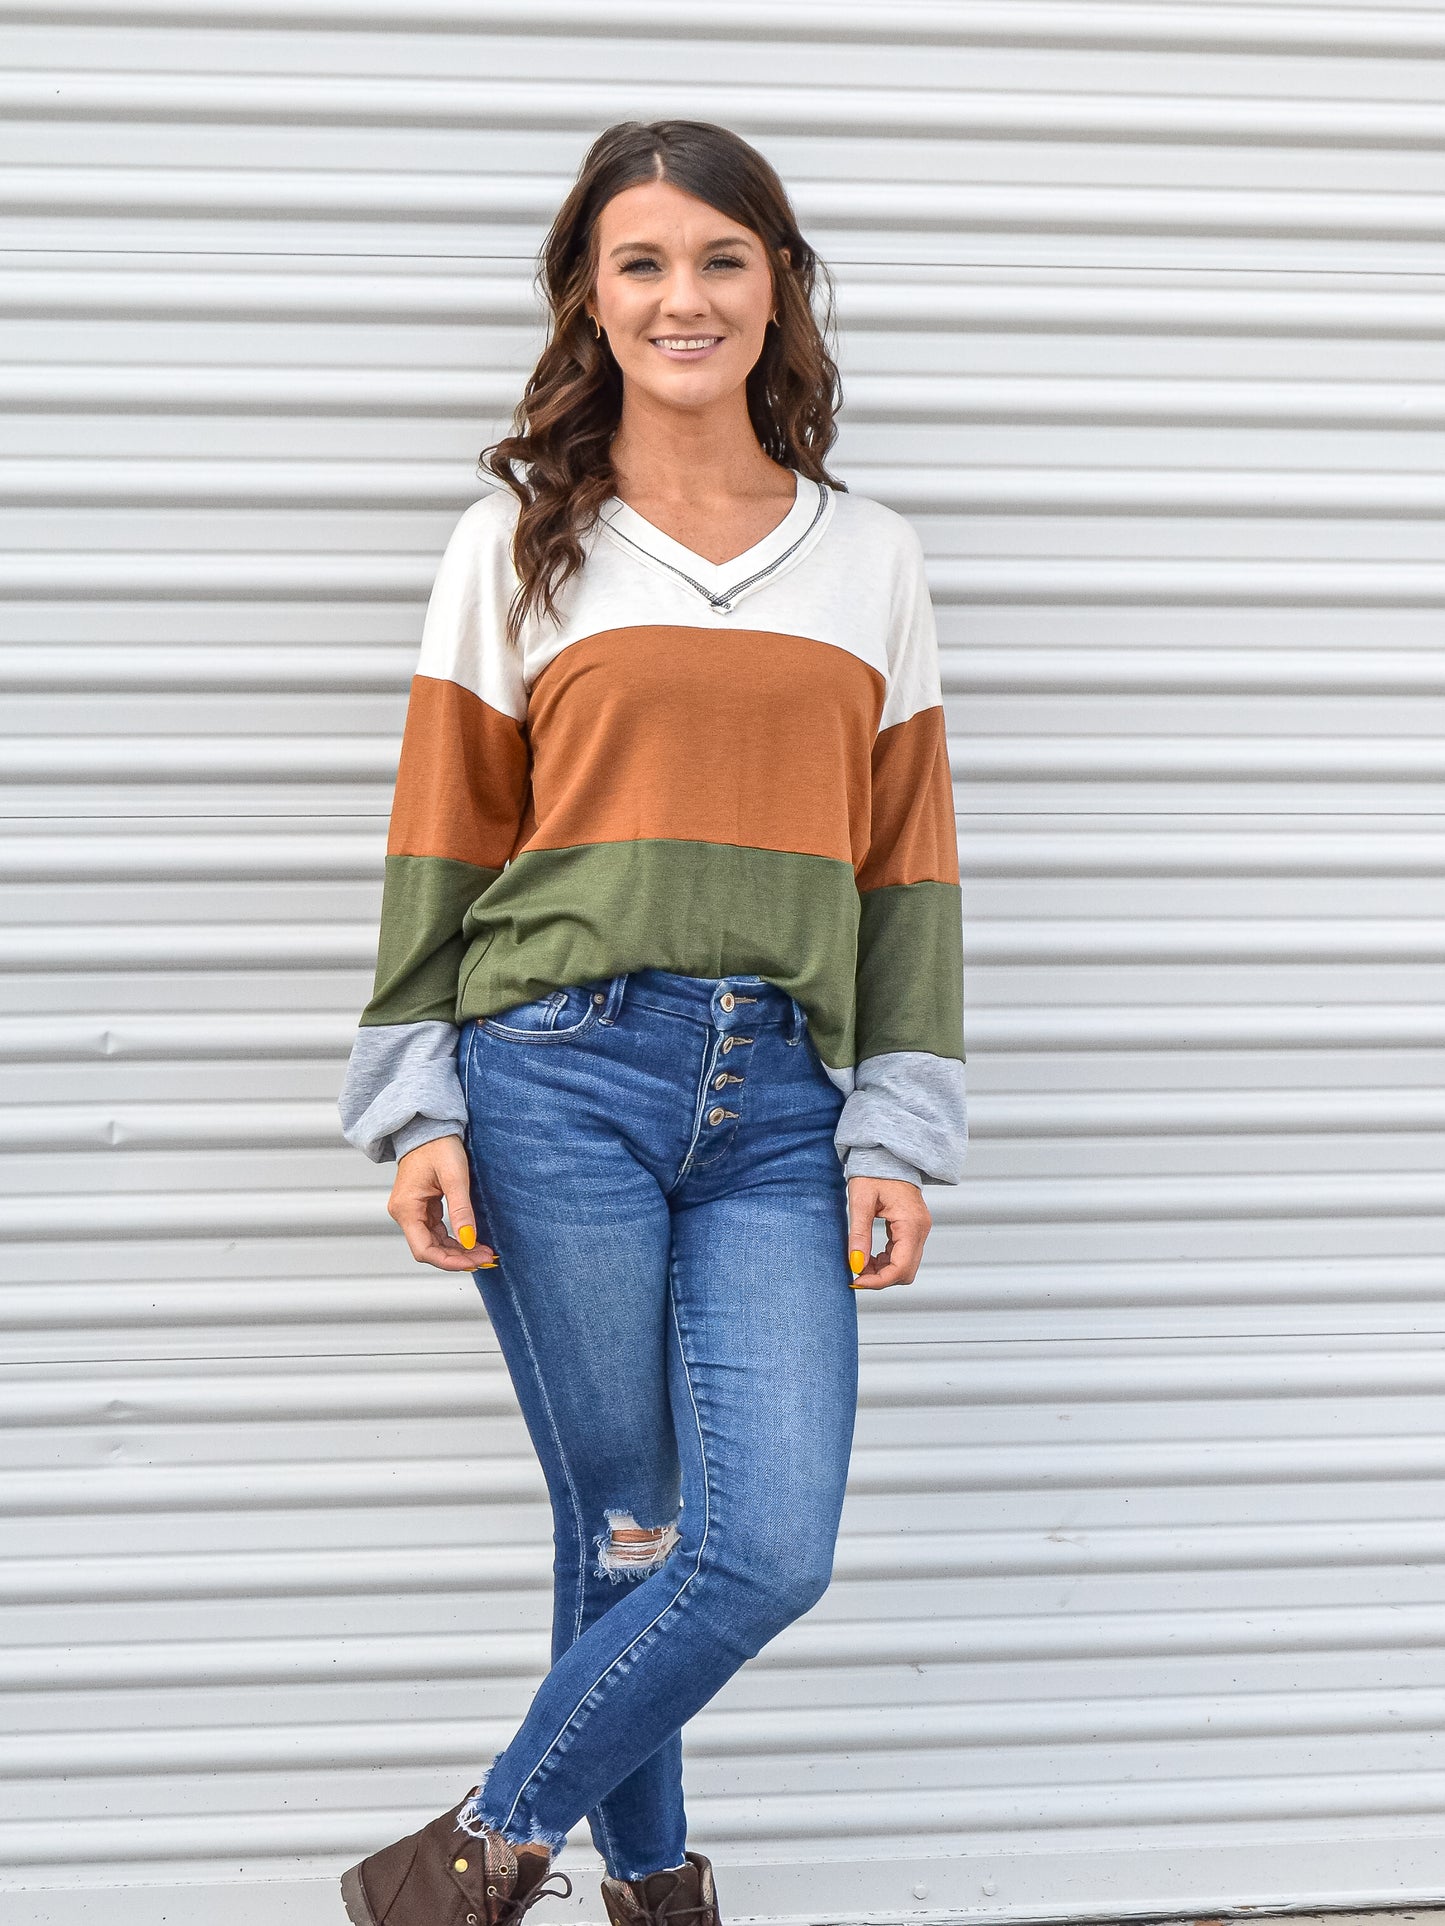 Long sleeve fall colors, colored blocked top